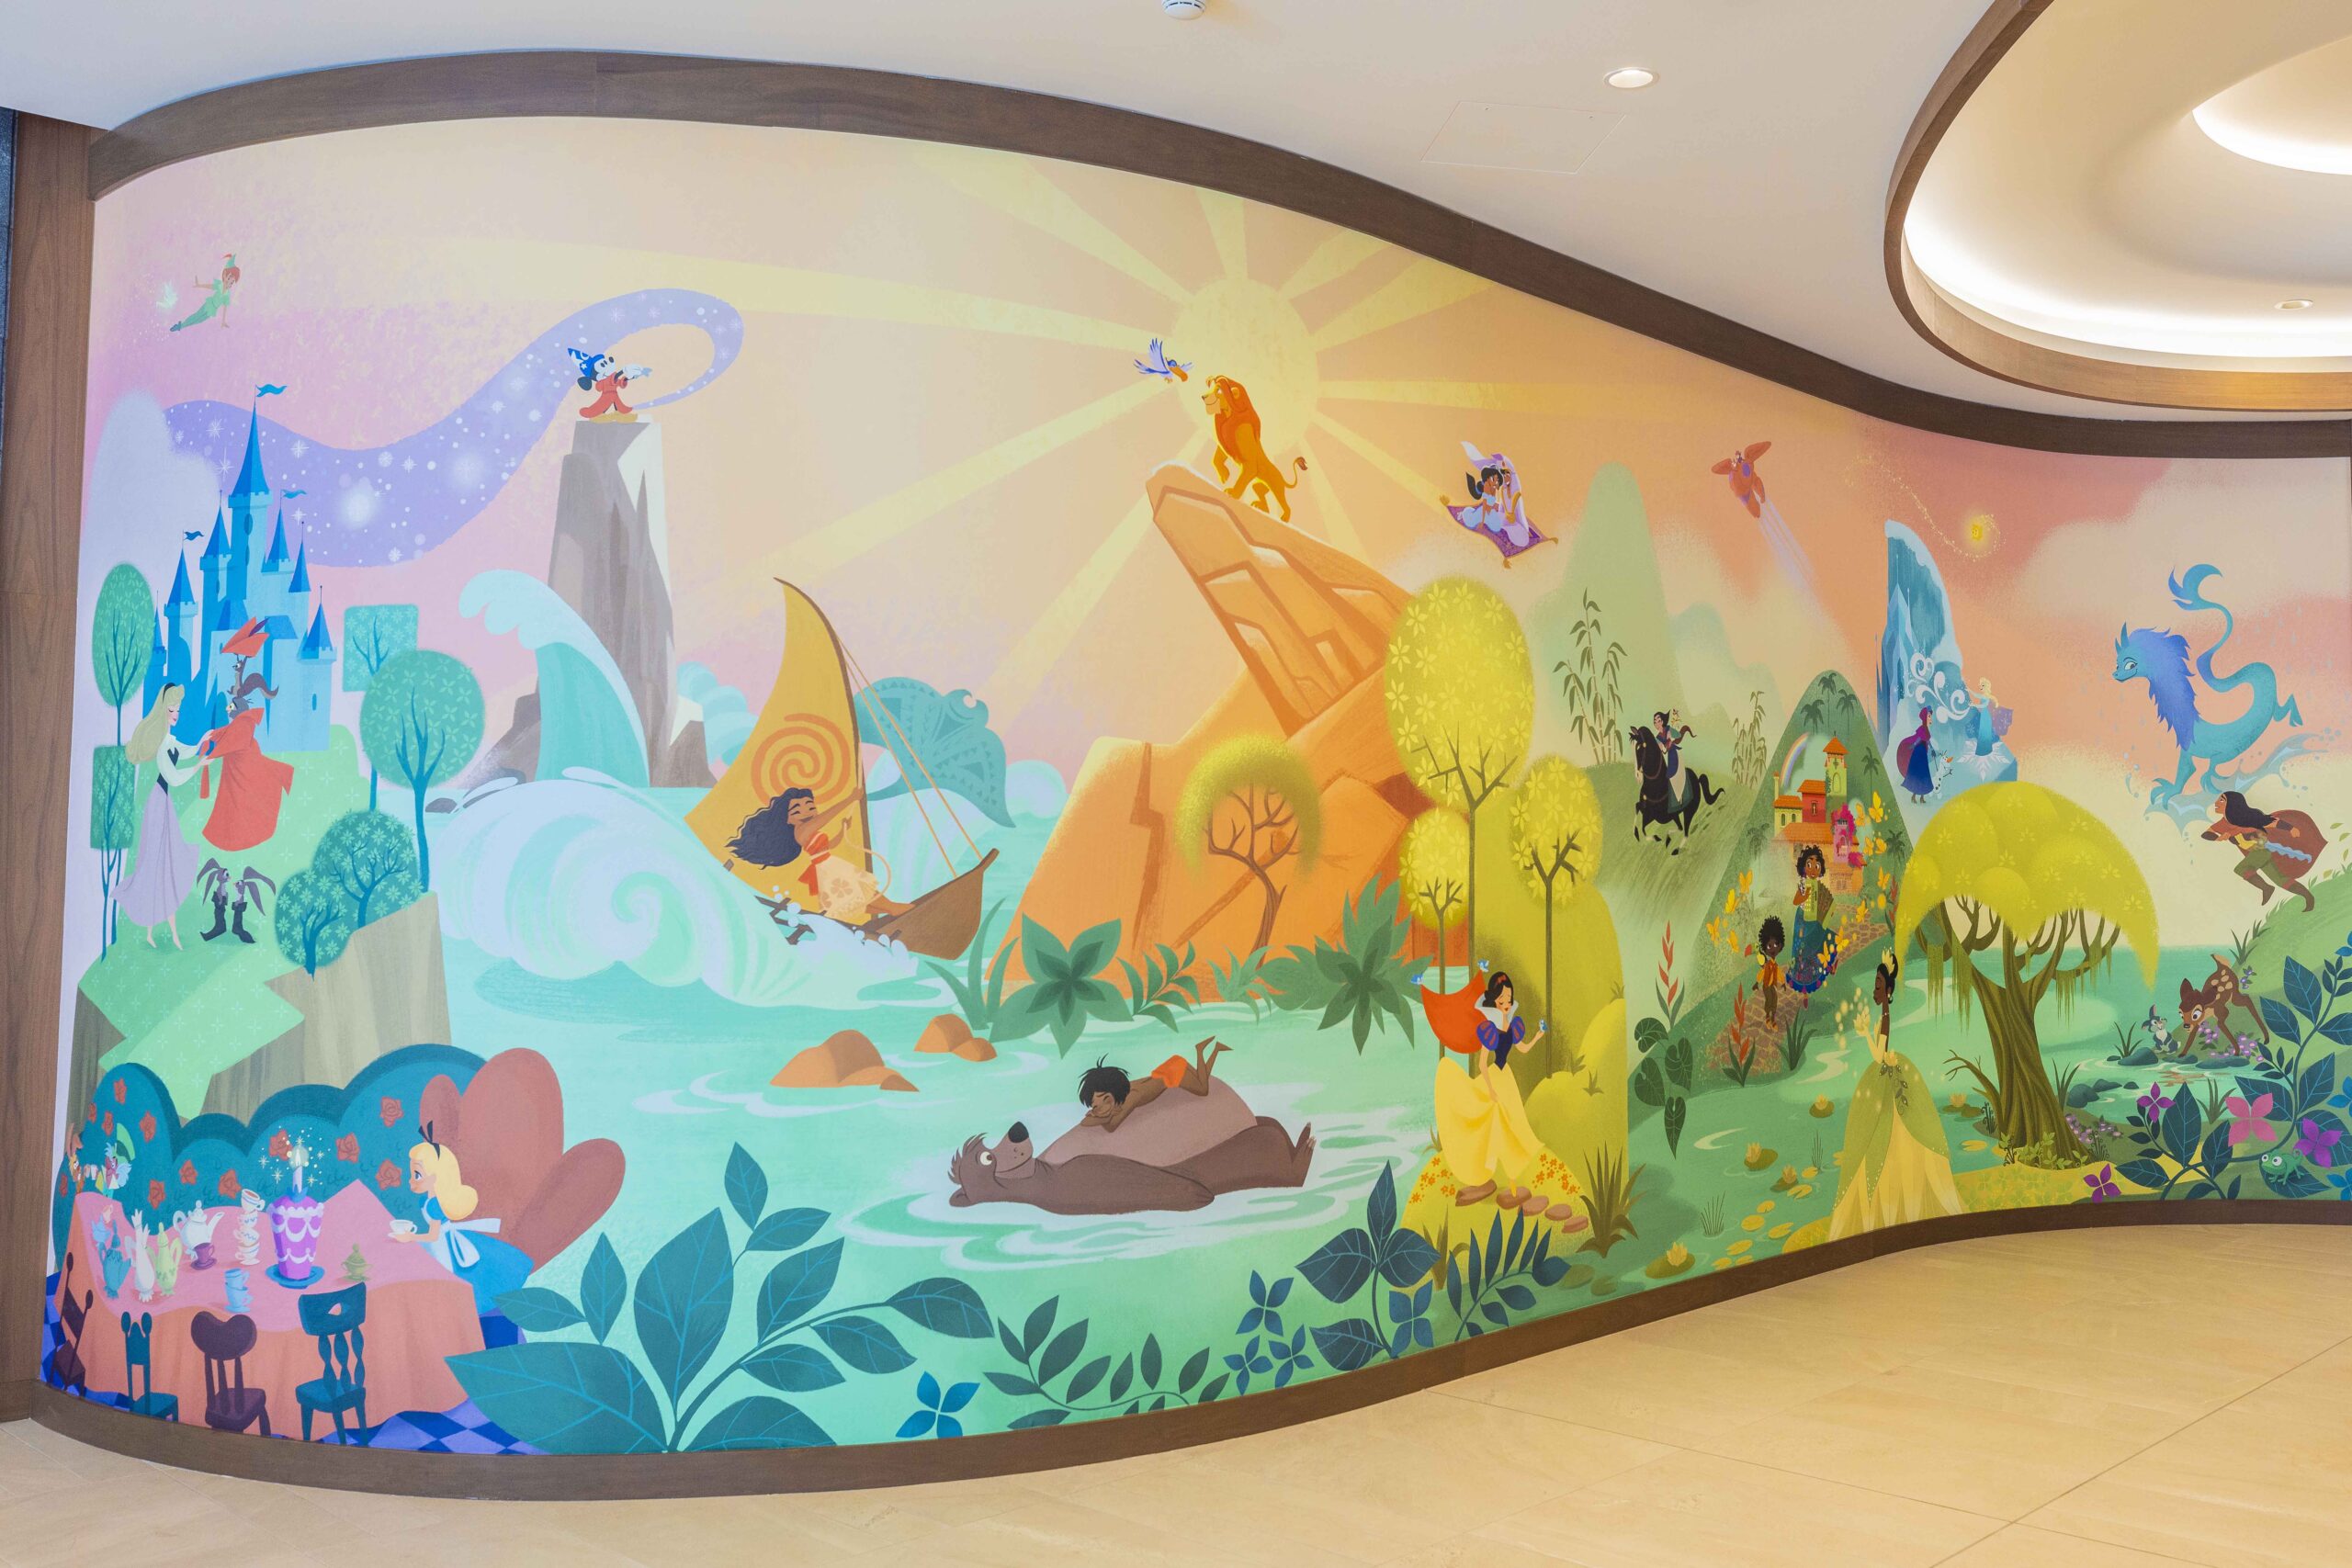 Guests will see beloved Disney characters and stories reflected in the theming of The Villas at Disneyland Hotel at the Disneyland Resort in Anaheim, Calif., including a one-of-a-kind mural in the lobby created by Disney Animation artist Lorelay Bové. (Christian Thompson/Disneyland Resort)